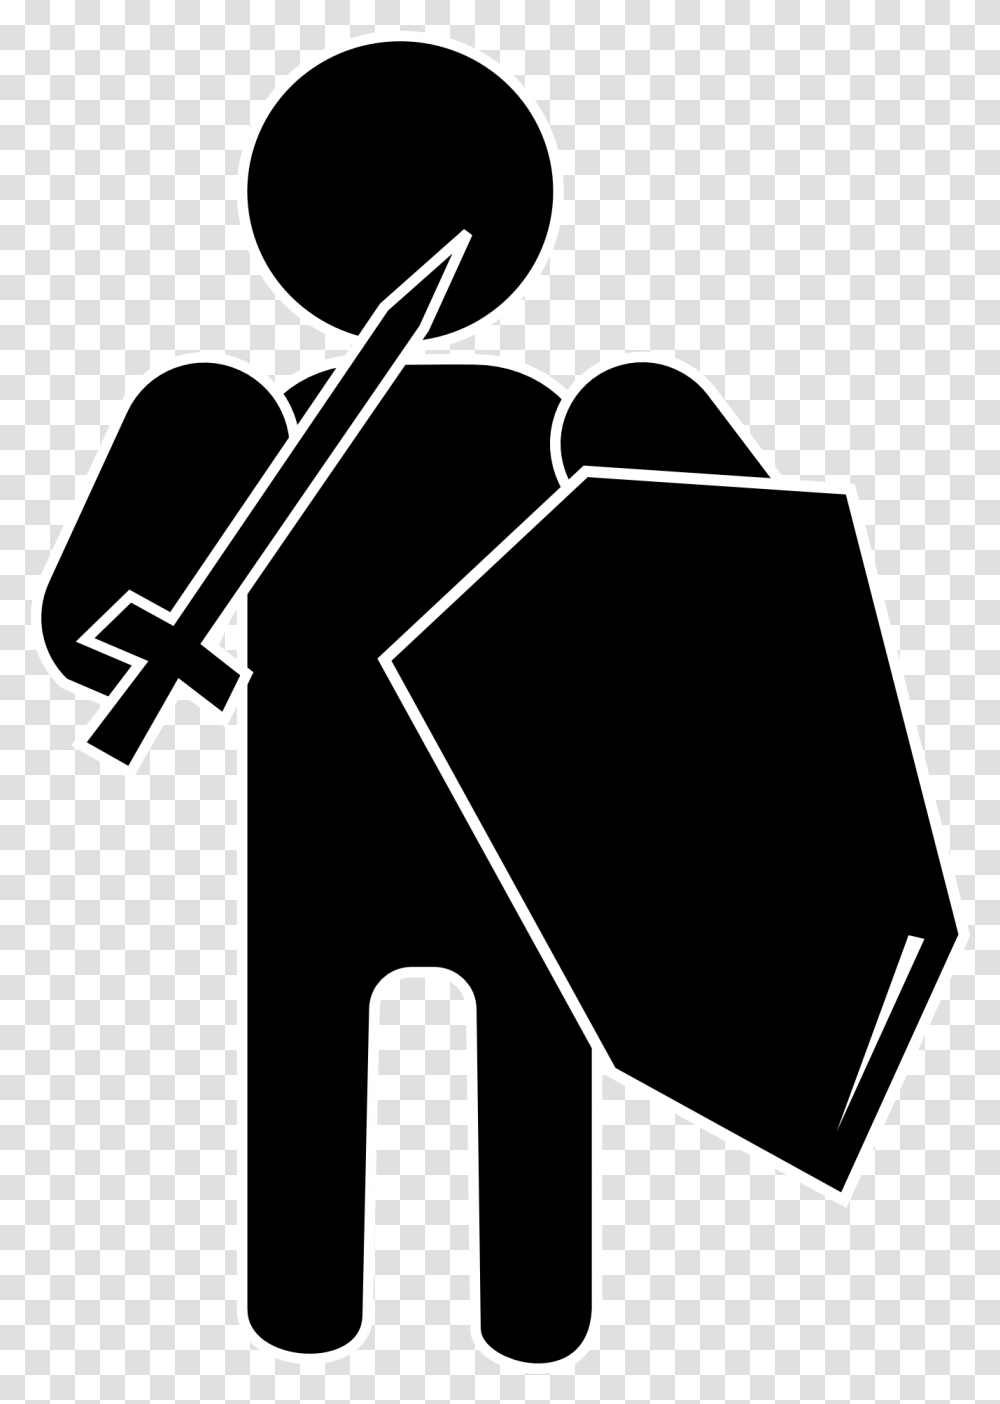 Knight With Sword And Shield Icon Free Person With Shield, Symbol, Stencil Transparent Png